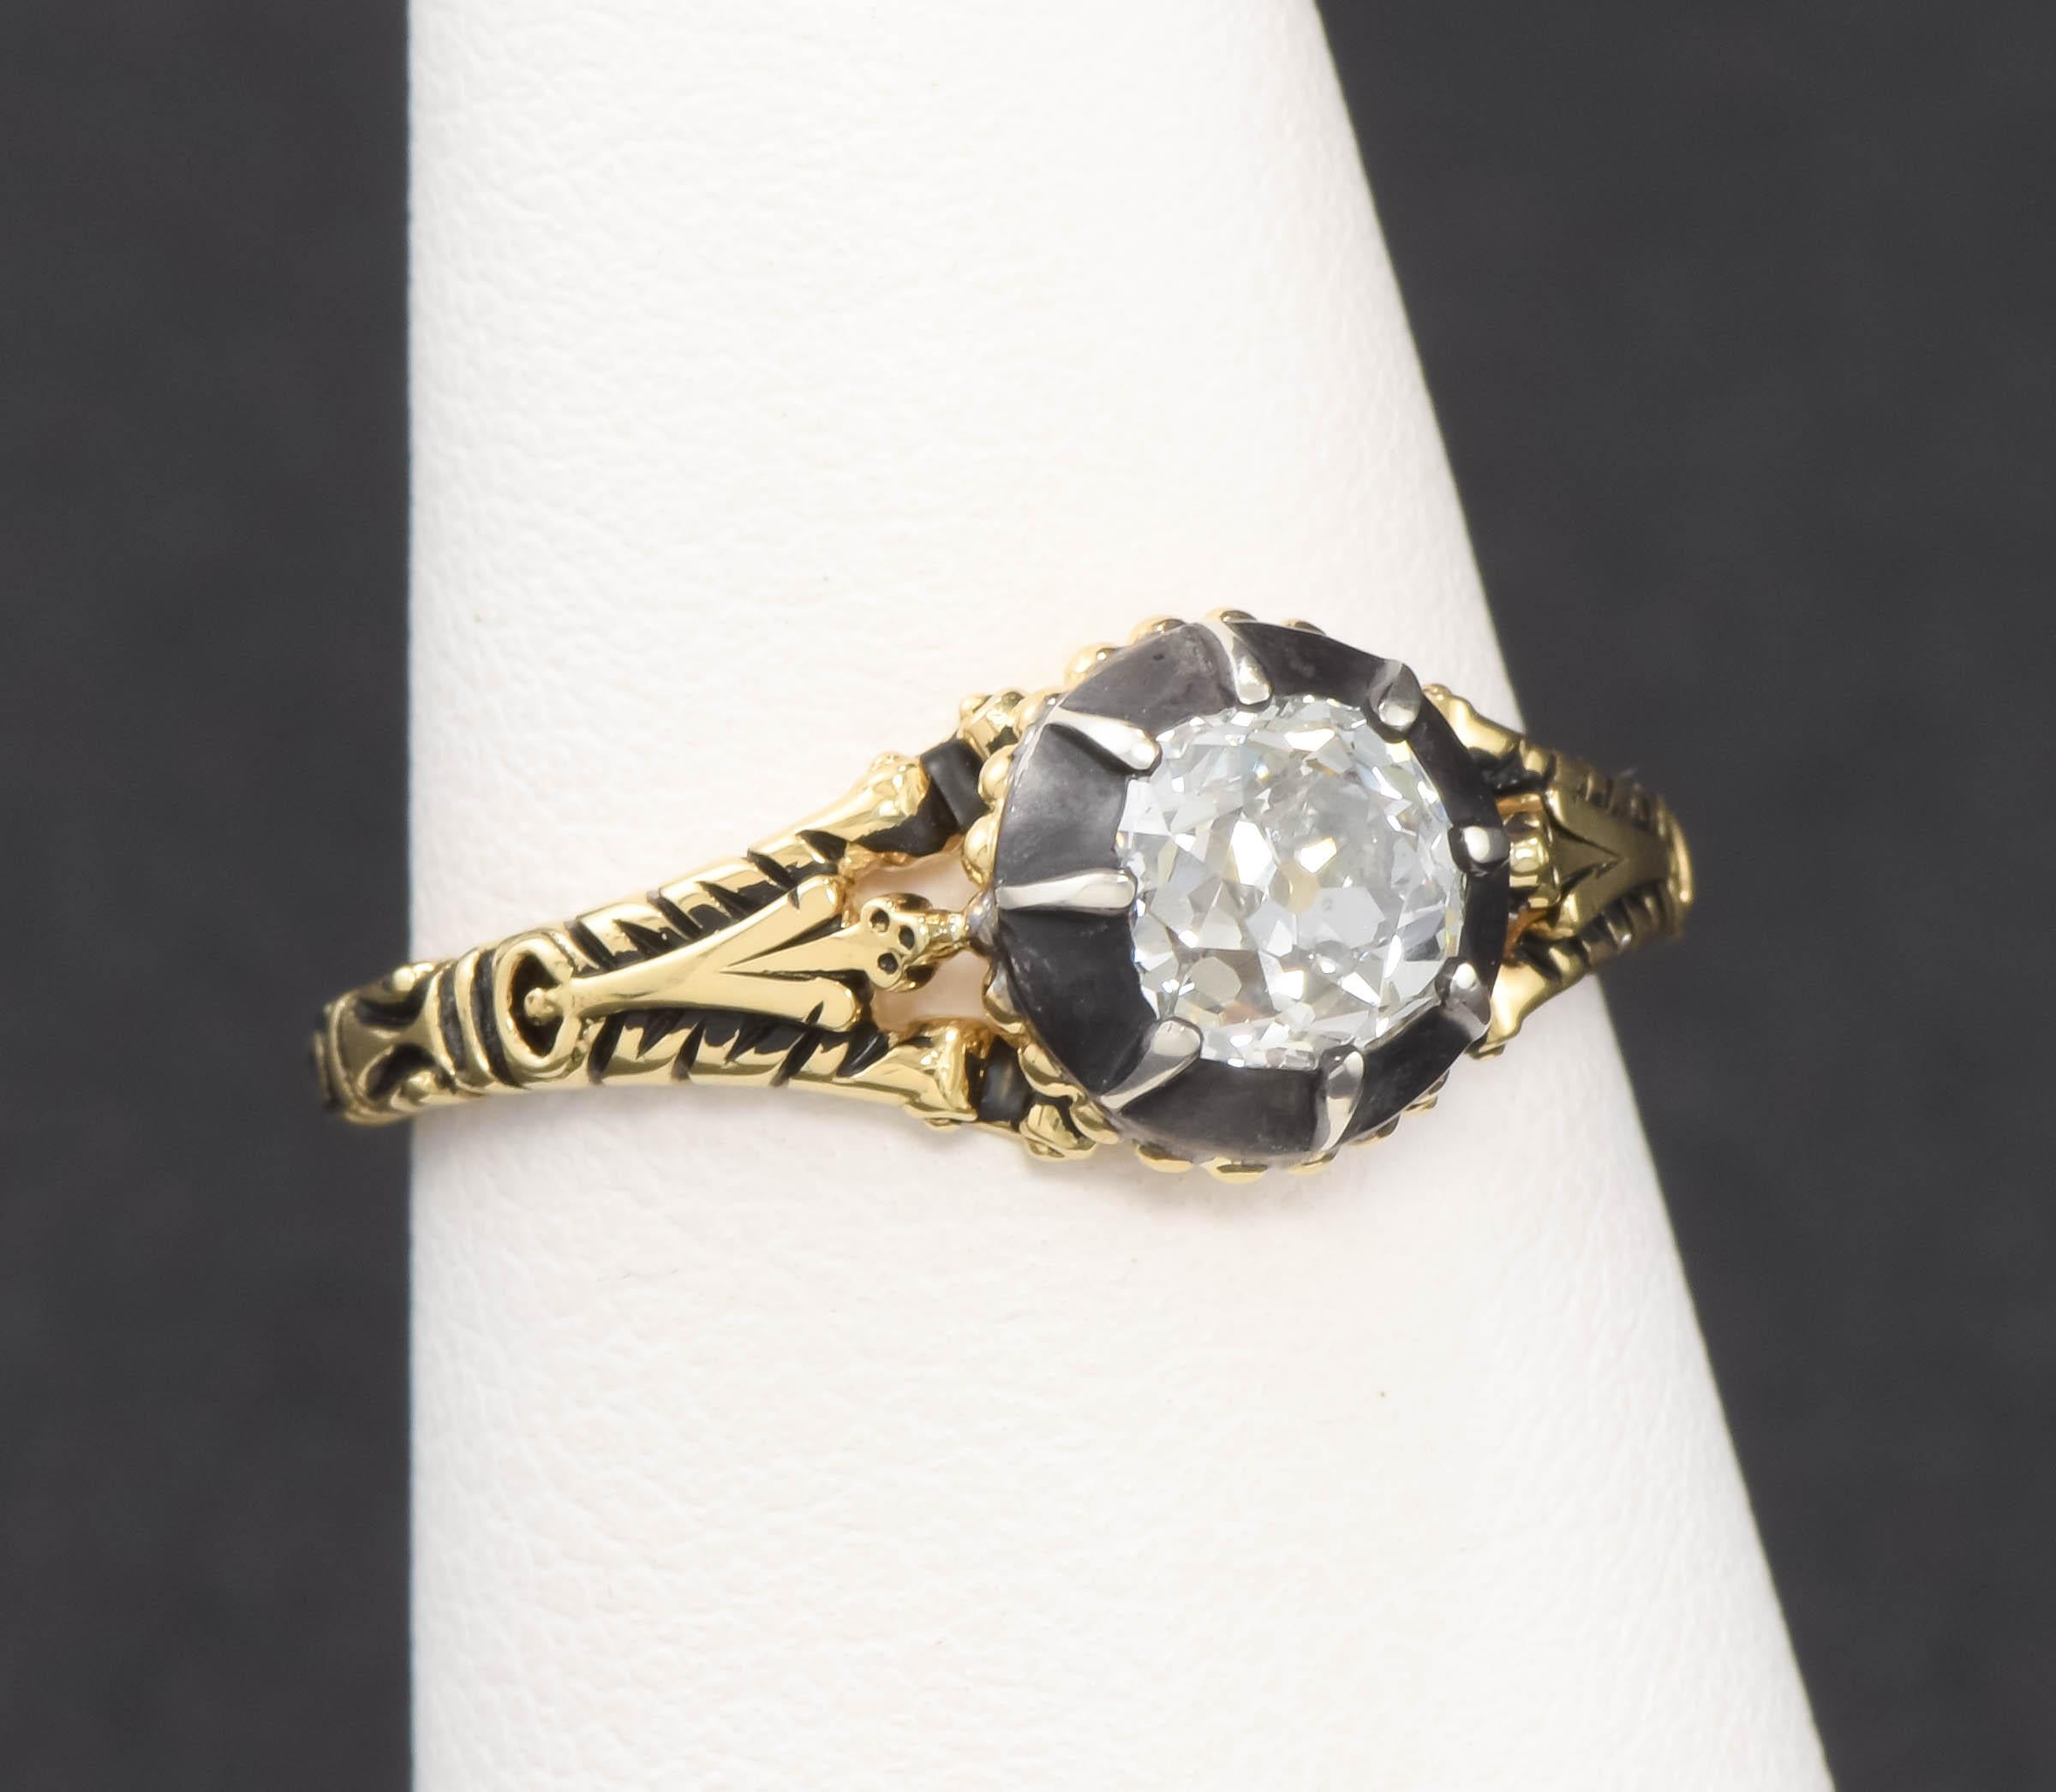 One of a kind, this elegant Georgian style engagement ring was custom made to highlight the original Georgian period old mine cut diamond I found in an antique French brooch.  As the old brooch was damaged, I rescued the suite of antique diamonds in